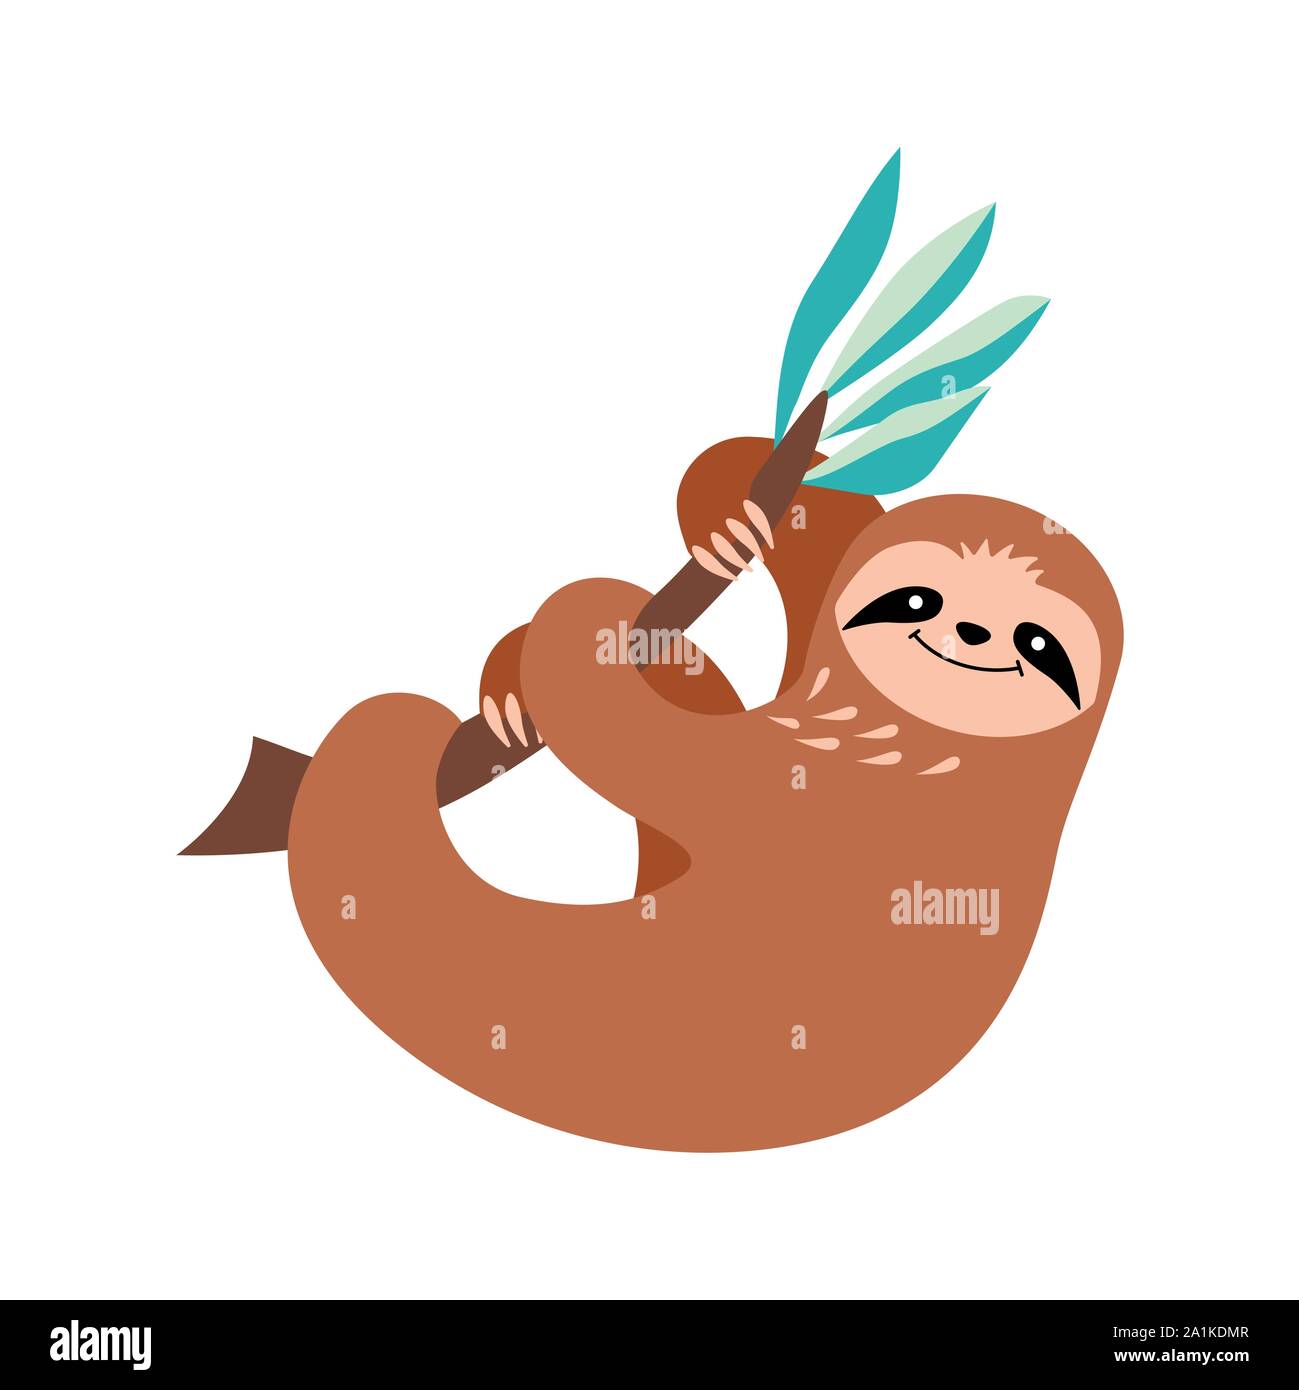 Cute cartoon sloth holding and hanging on a branch. Smiling animal isolated on white background. Flat vector illustration. Stock Vector